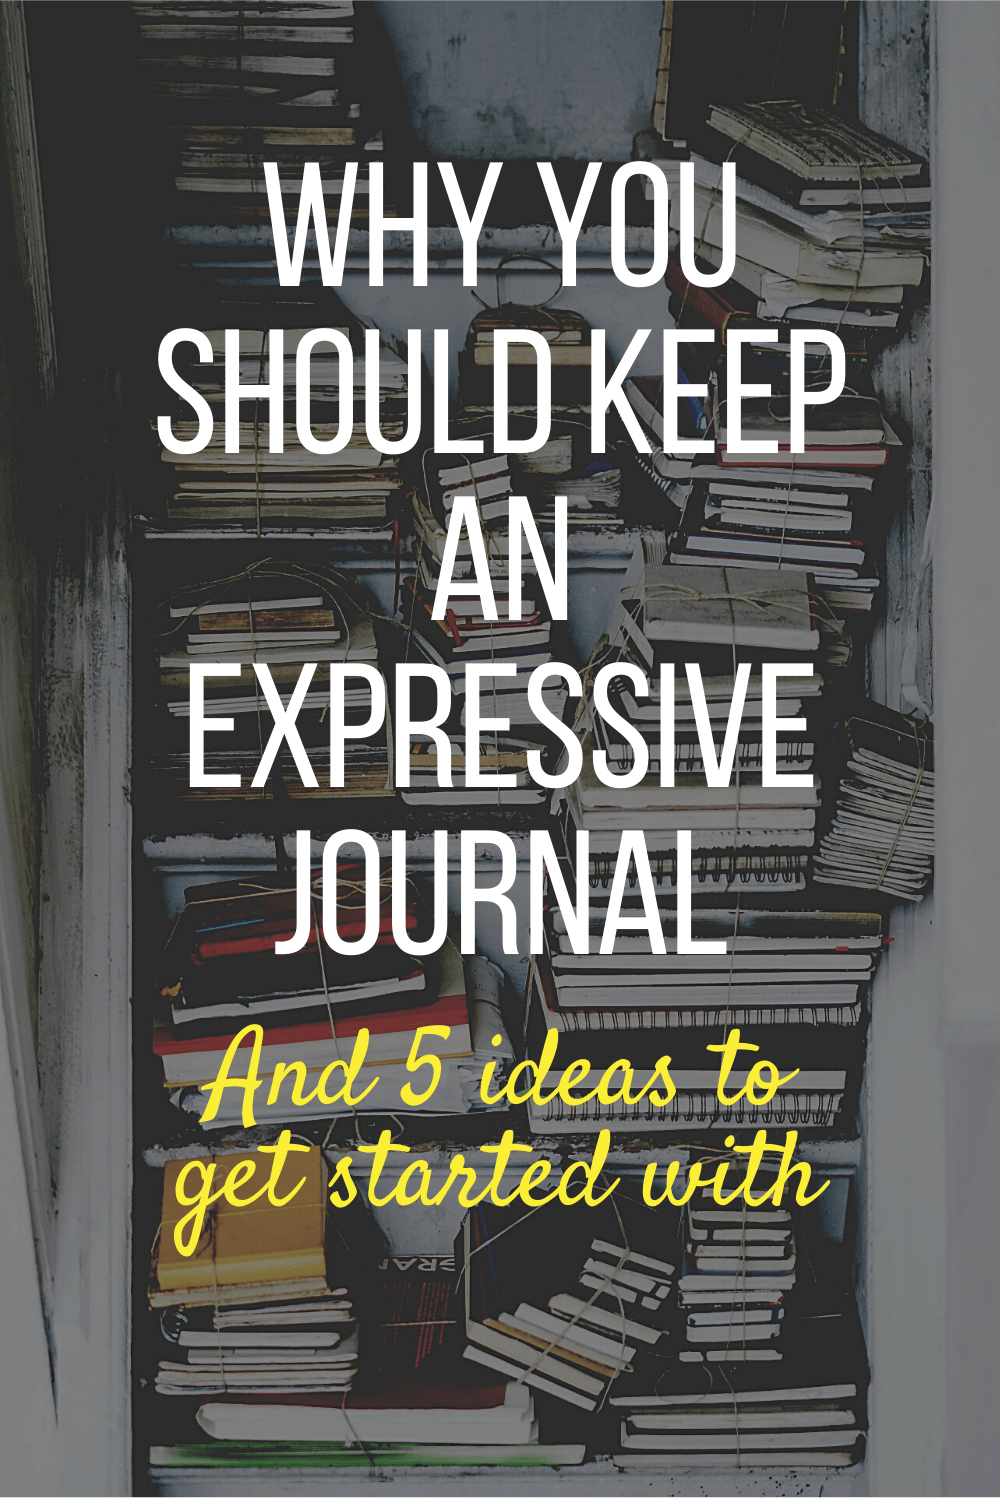 Have you ever tried keeping an expressive journal? It's a very powerful way to work through your feelings in a safe environment